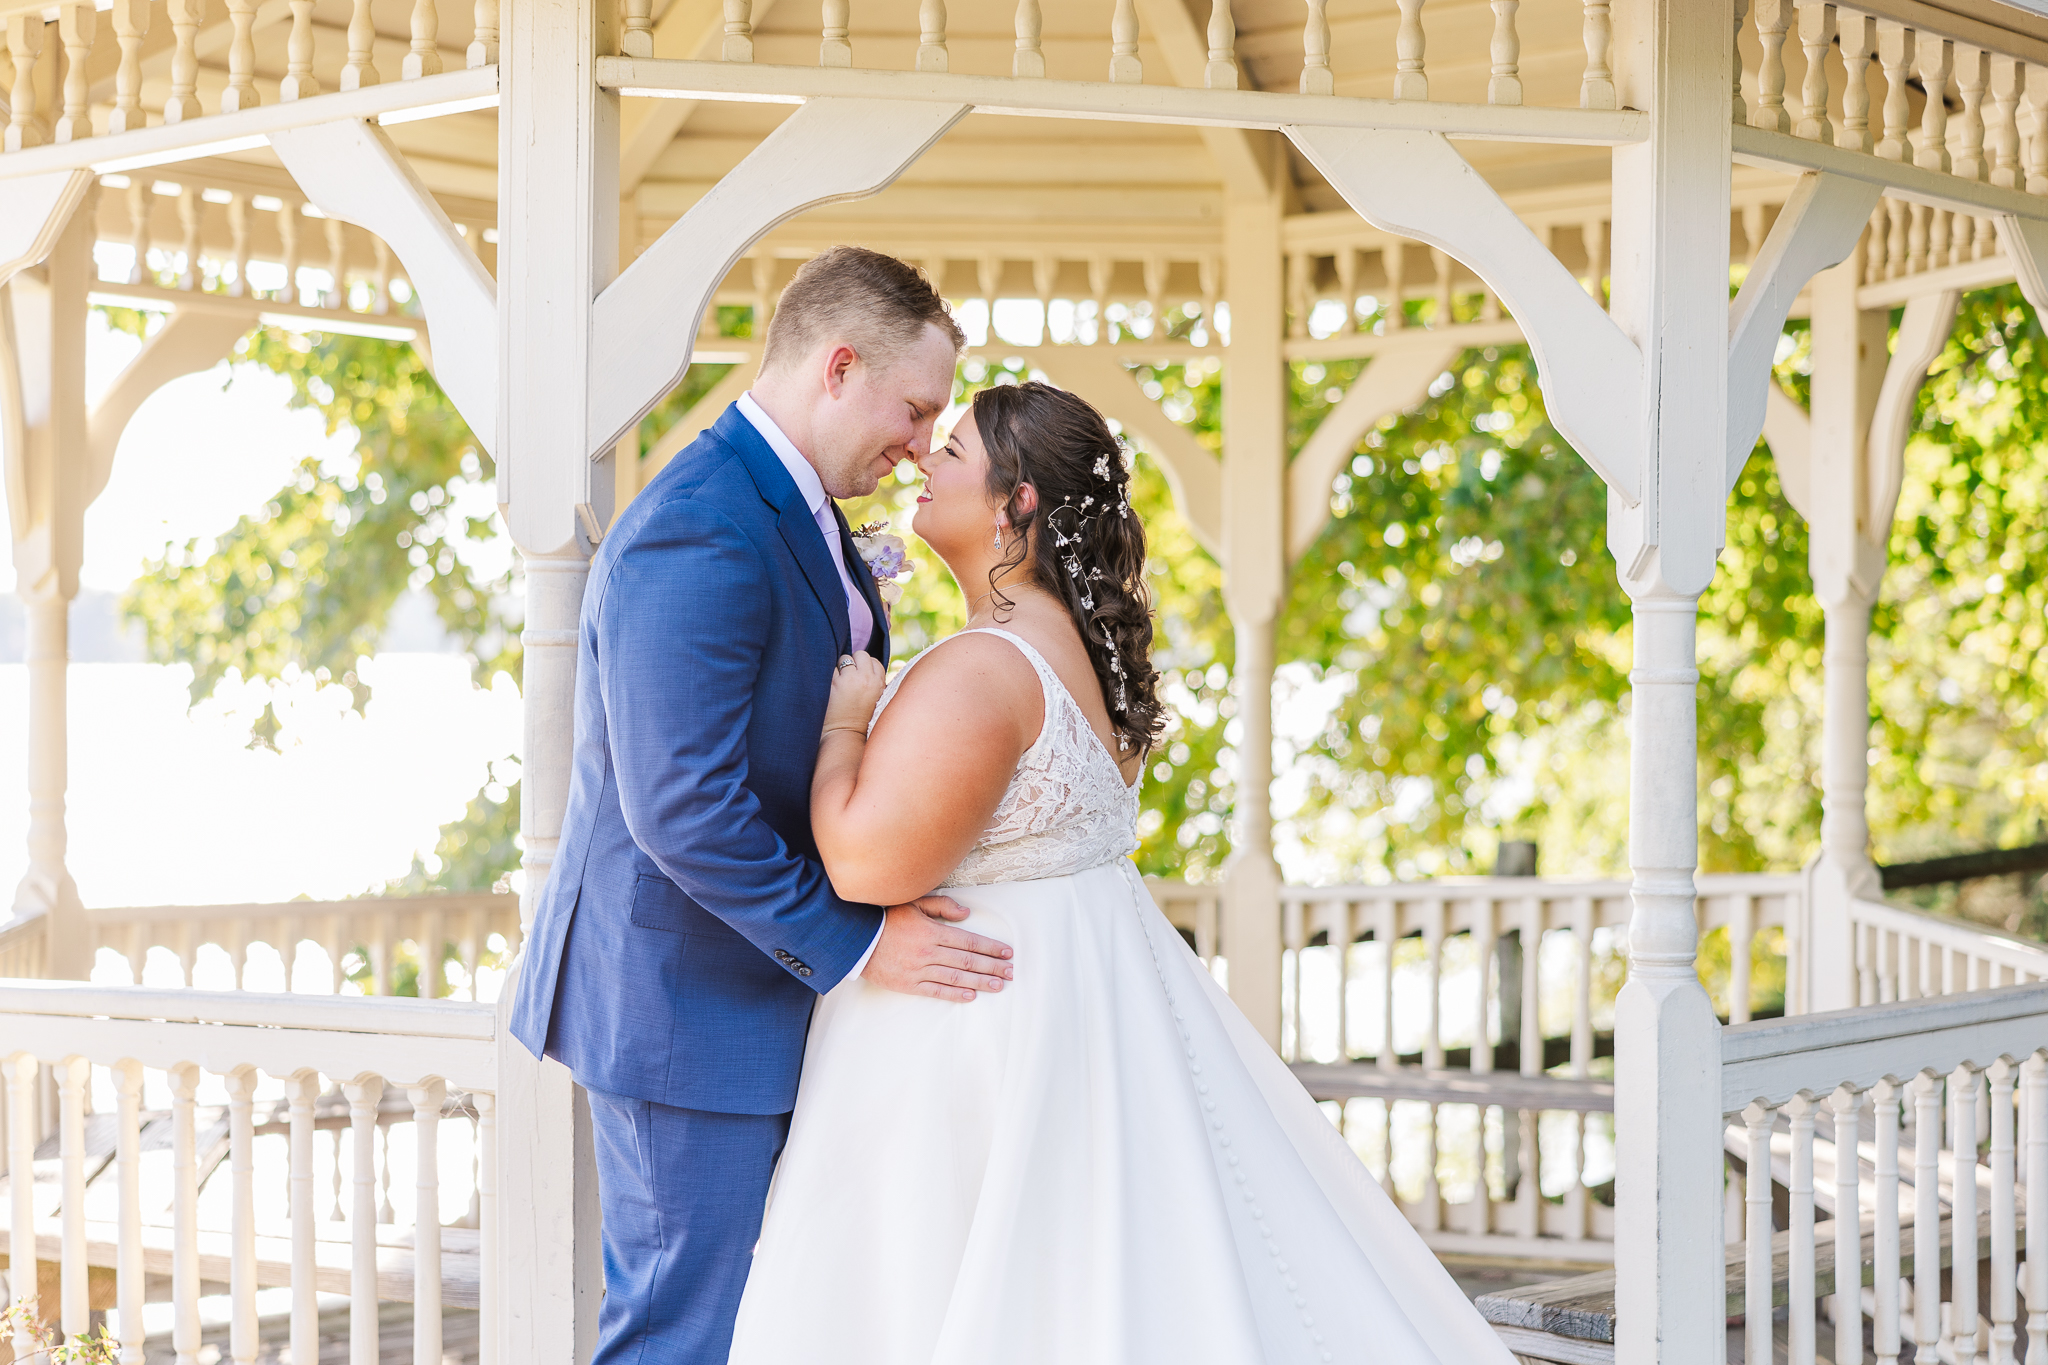 A bride and groom stand under a gazebo nuzzling noses